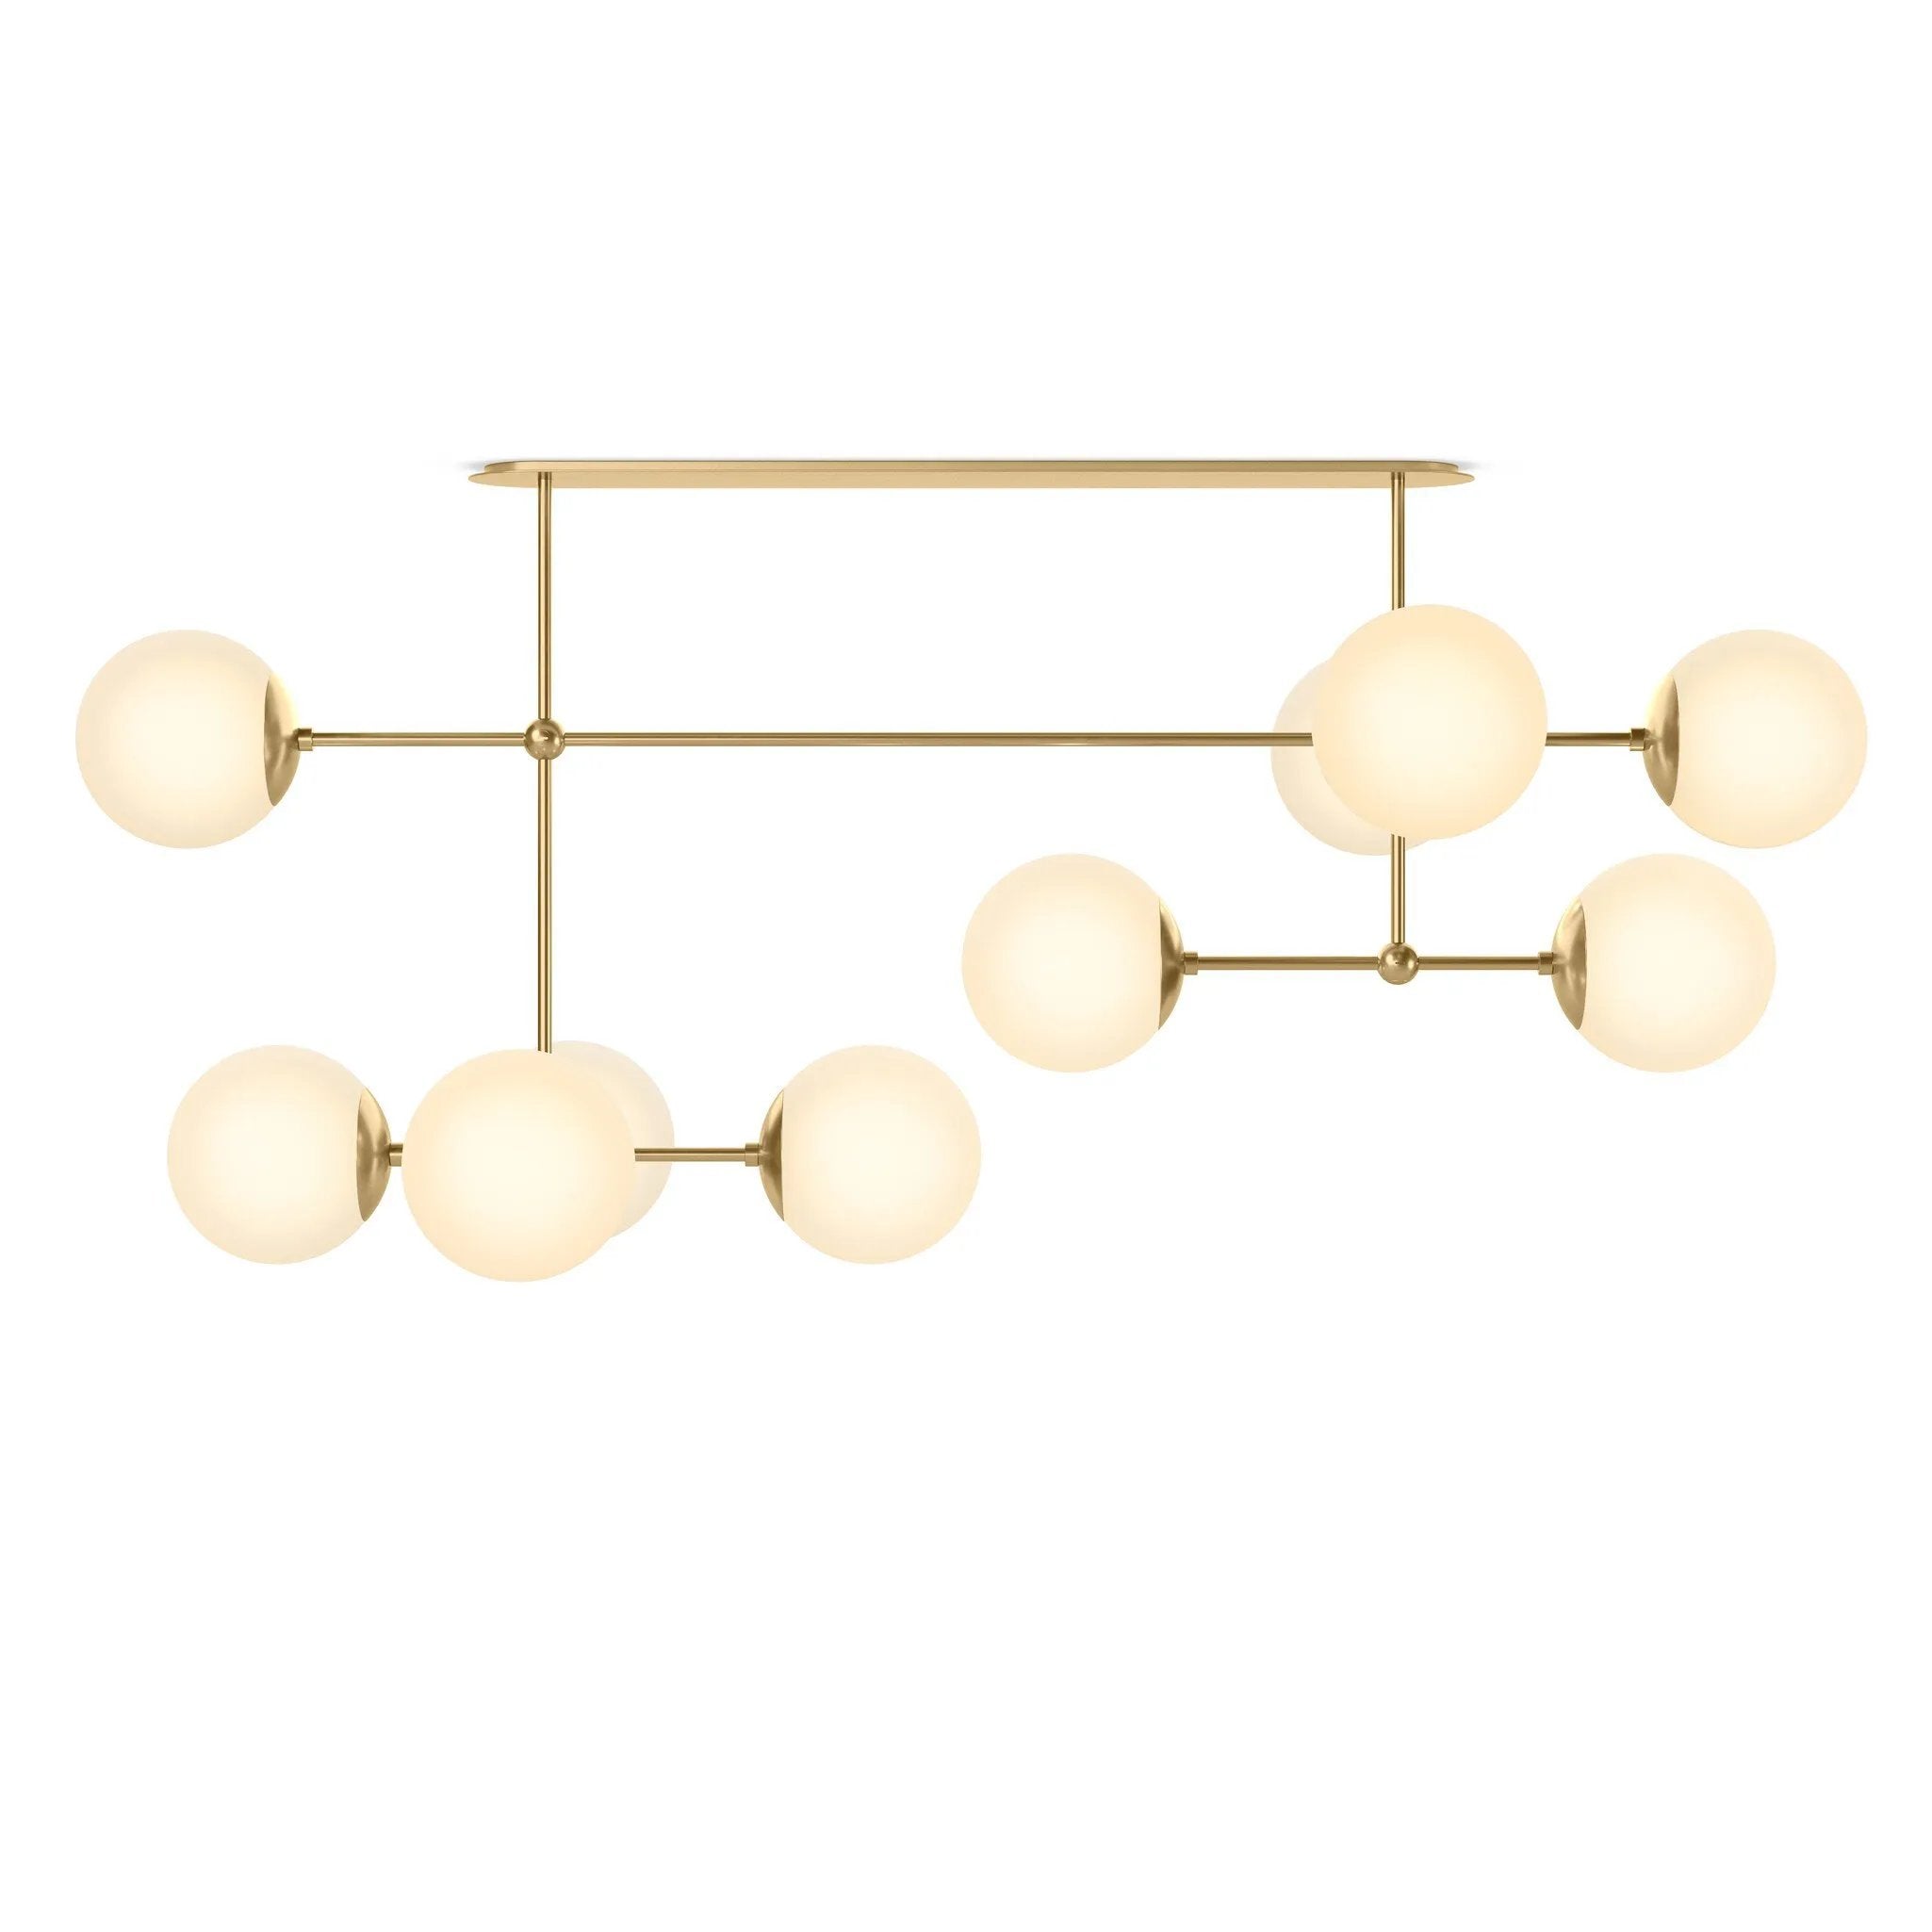 Matte glass spheres seem to extend and reach across smooth brass rods. Each globe is individually blown, shaped and sculpted by hand through a one-hour process. Matte globes are specially manufactured to evenly diffuse light. Brass and glass are 98% recyclable. Designed and sustainably made in Poland by Schwung.Overall Dimensions64.25"w x 30. Amethyst Home provides interior design, new home construction design consulting, vintage area rugs, and lighting in the Winter Garden metro area.